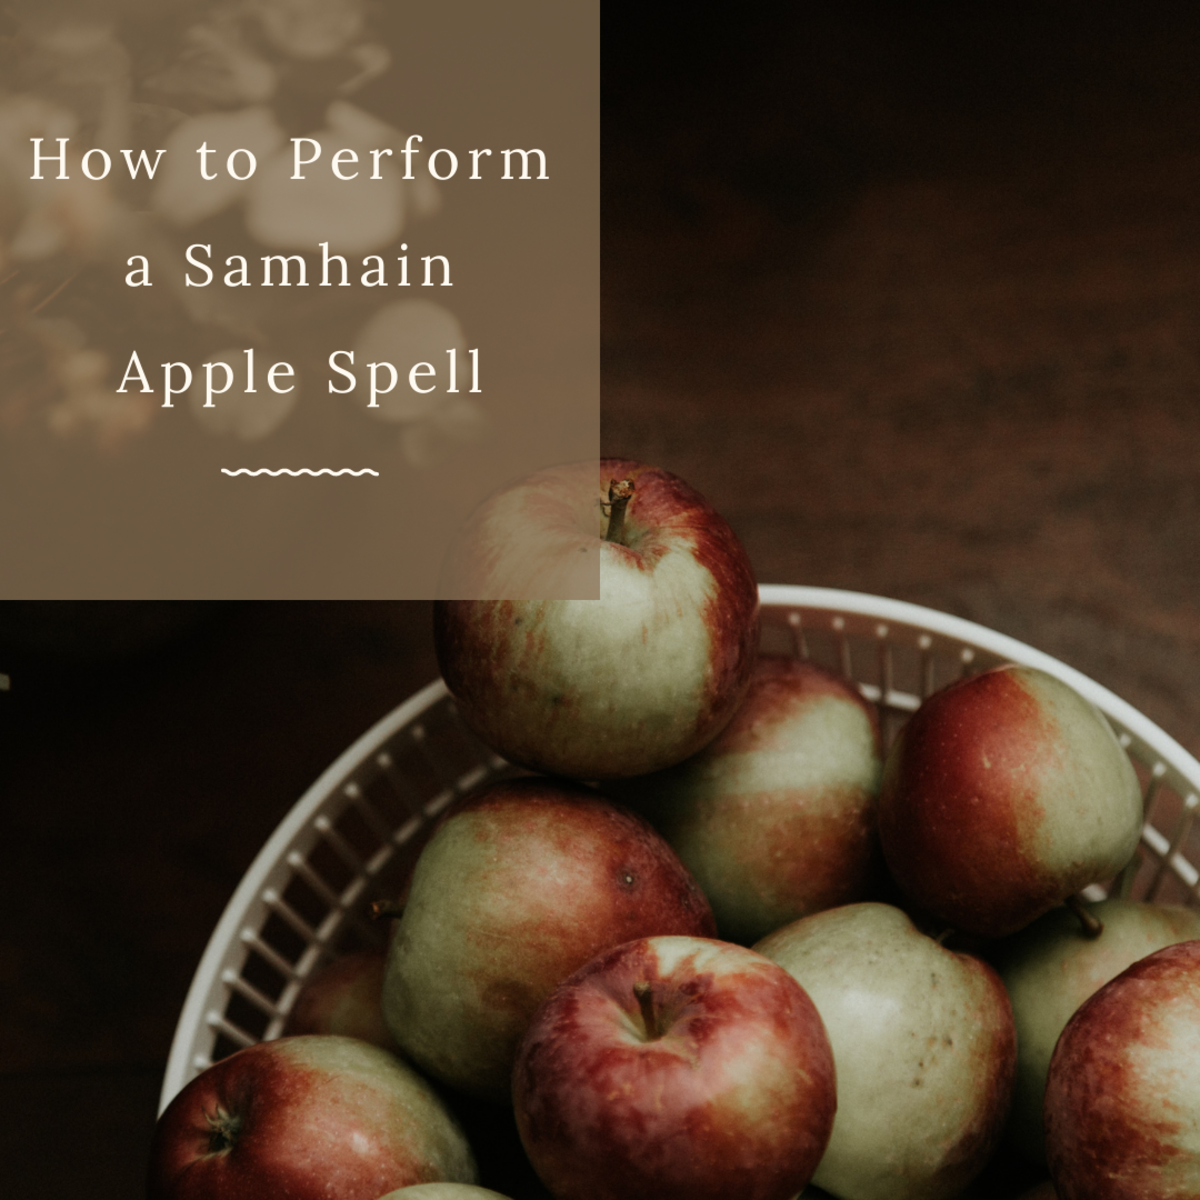 Samhain is the perfect time of year for this simple form of apple magic